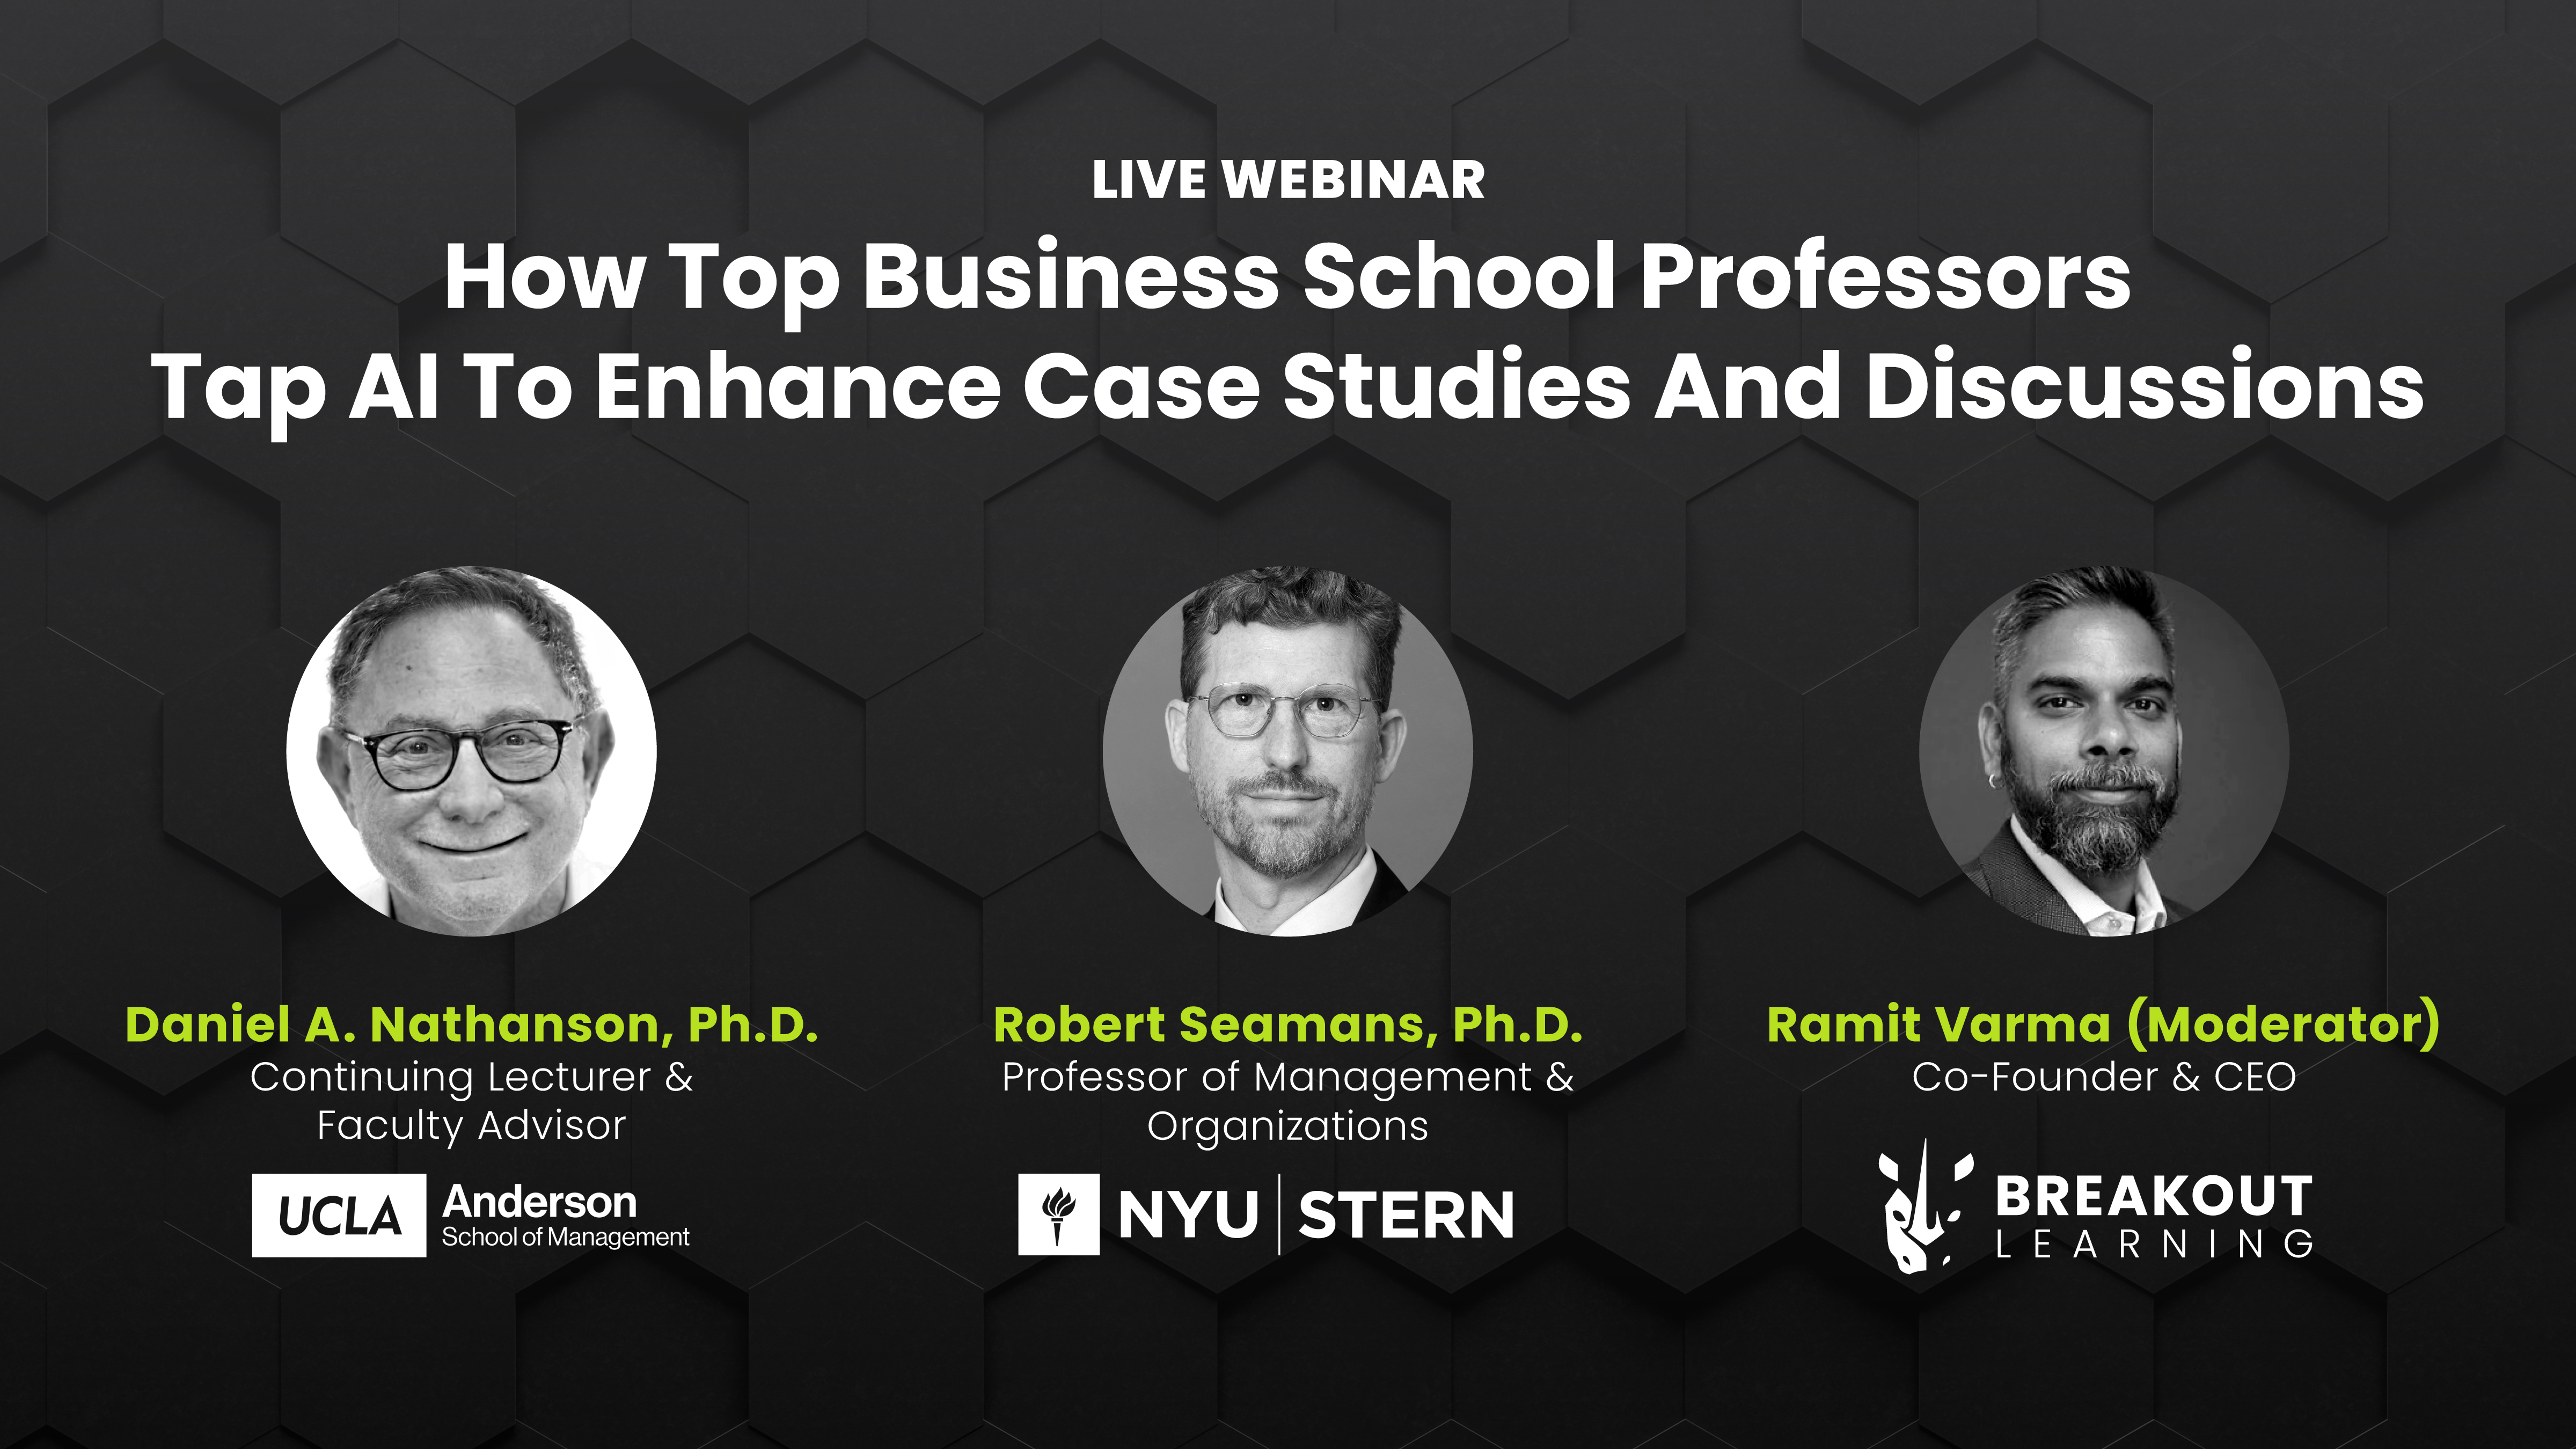 Breakout Learning To Host November 9th Webinar on AI-Powered Business Education